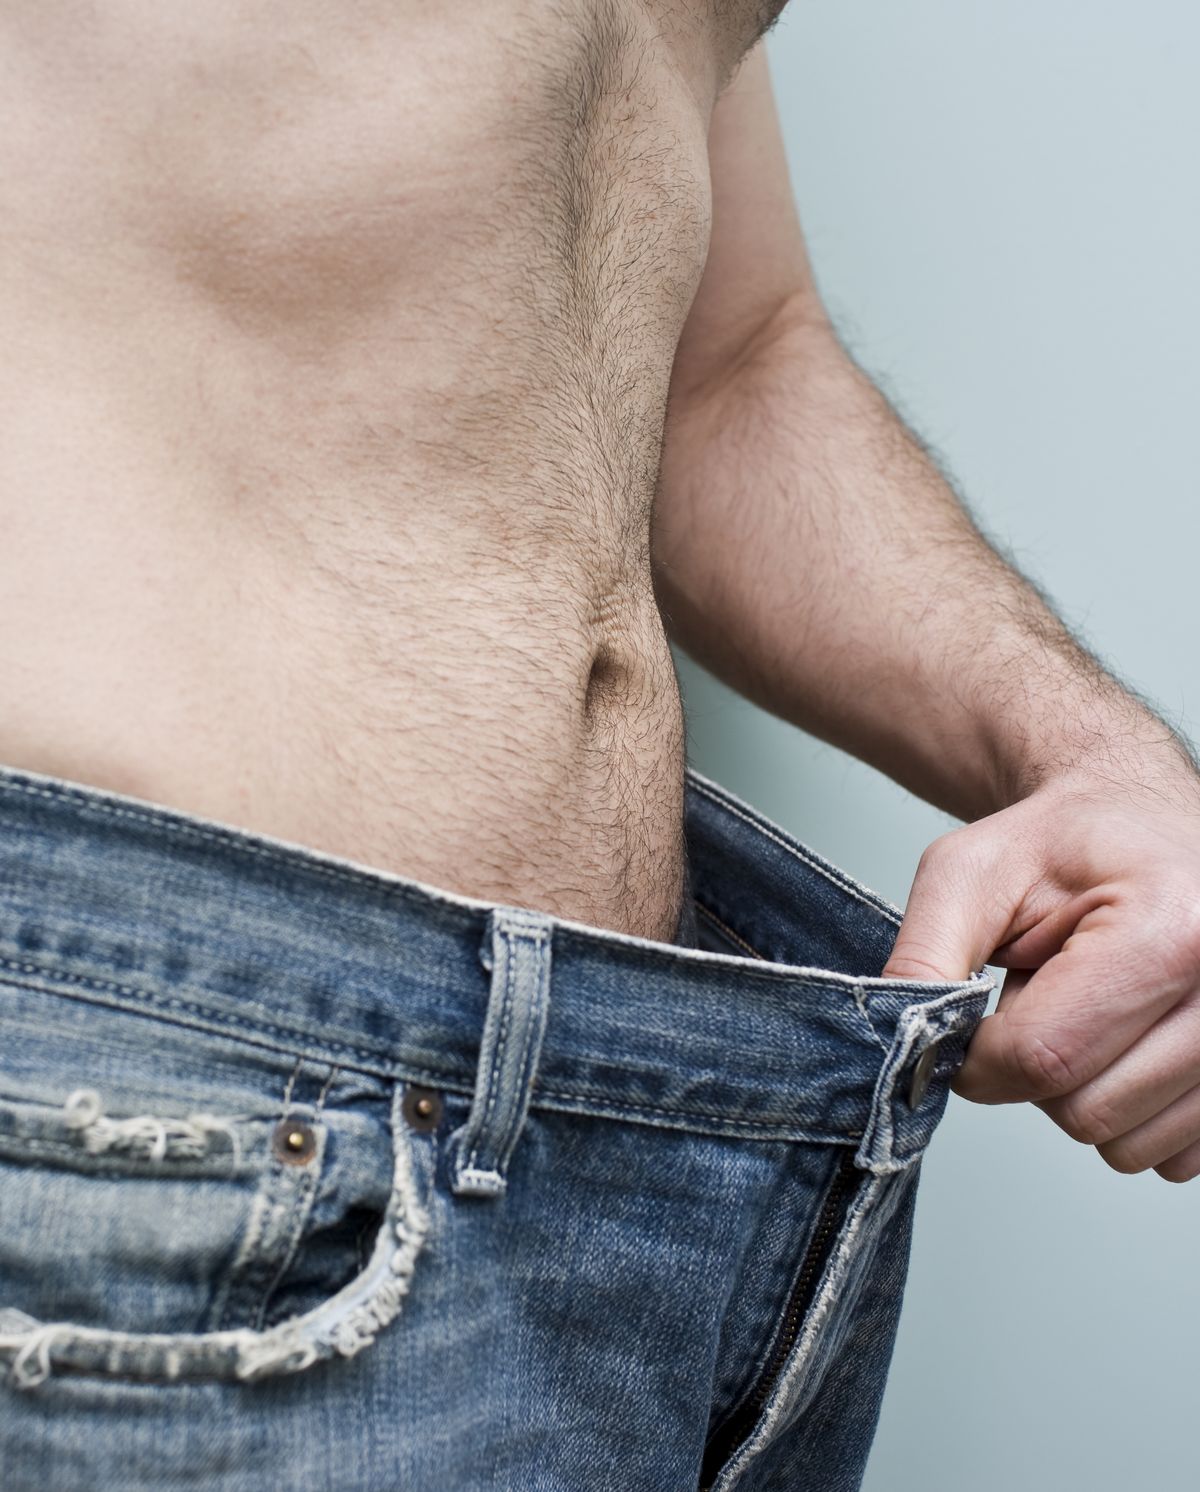 Man showing weight loss by showing his loose pants